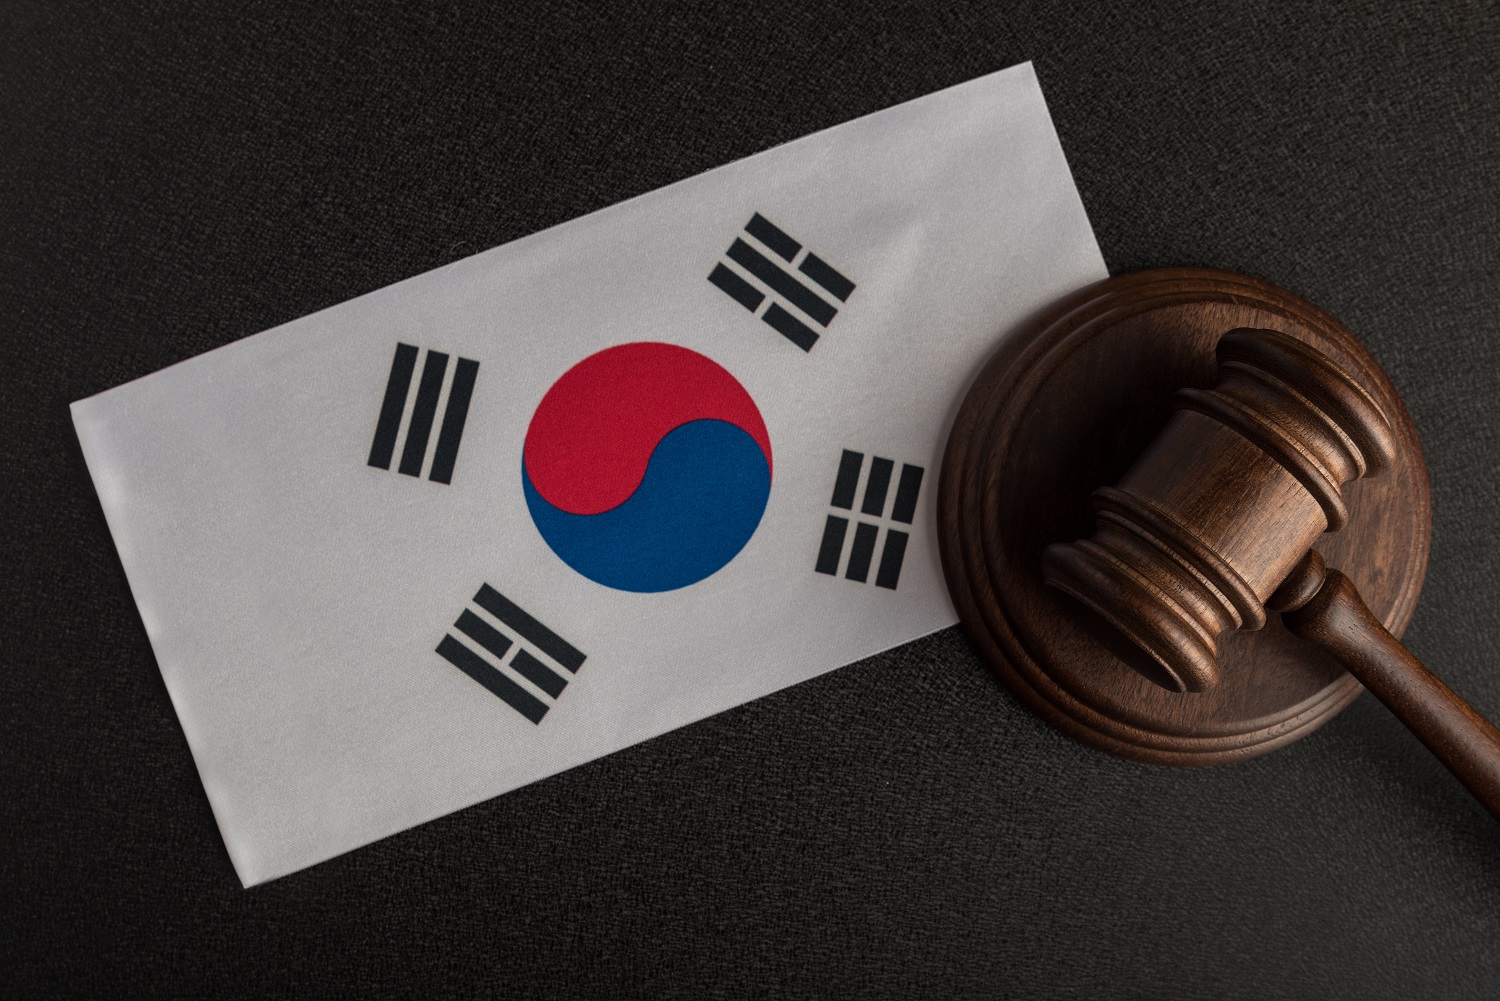 A gavel and block next to a South Korean flag on a wooden table.